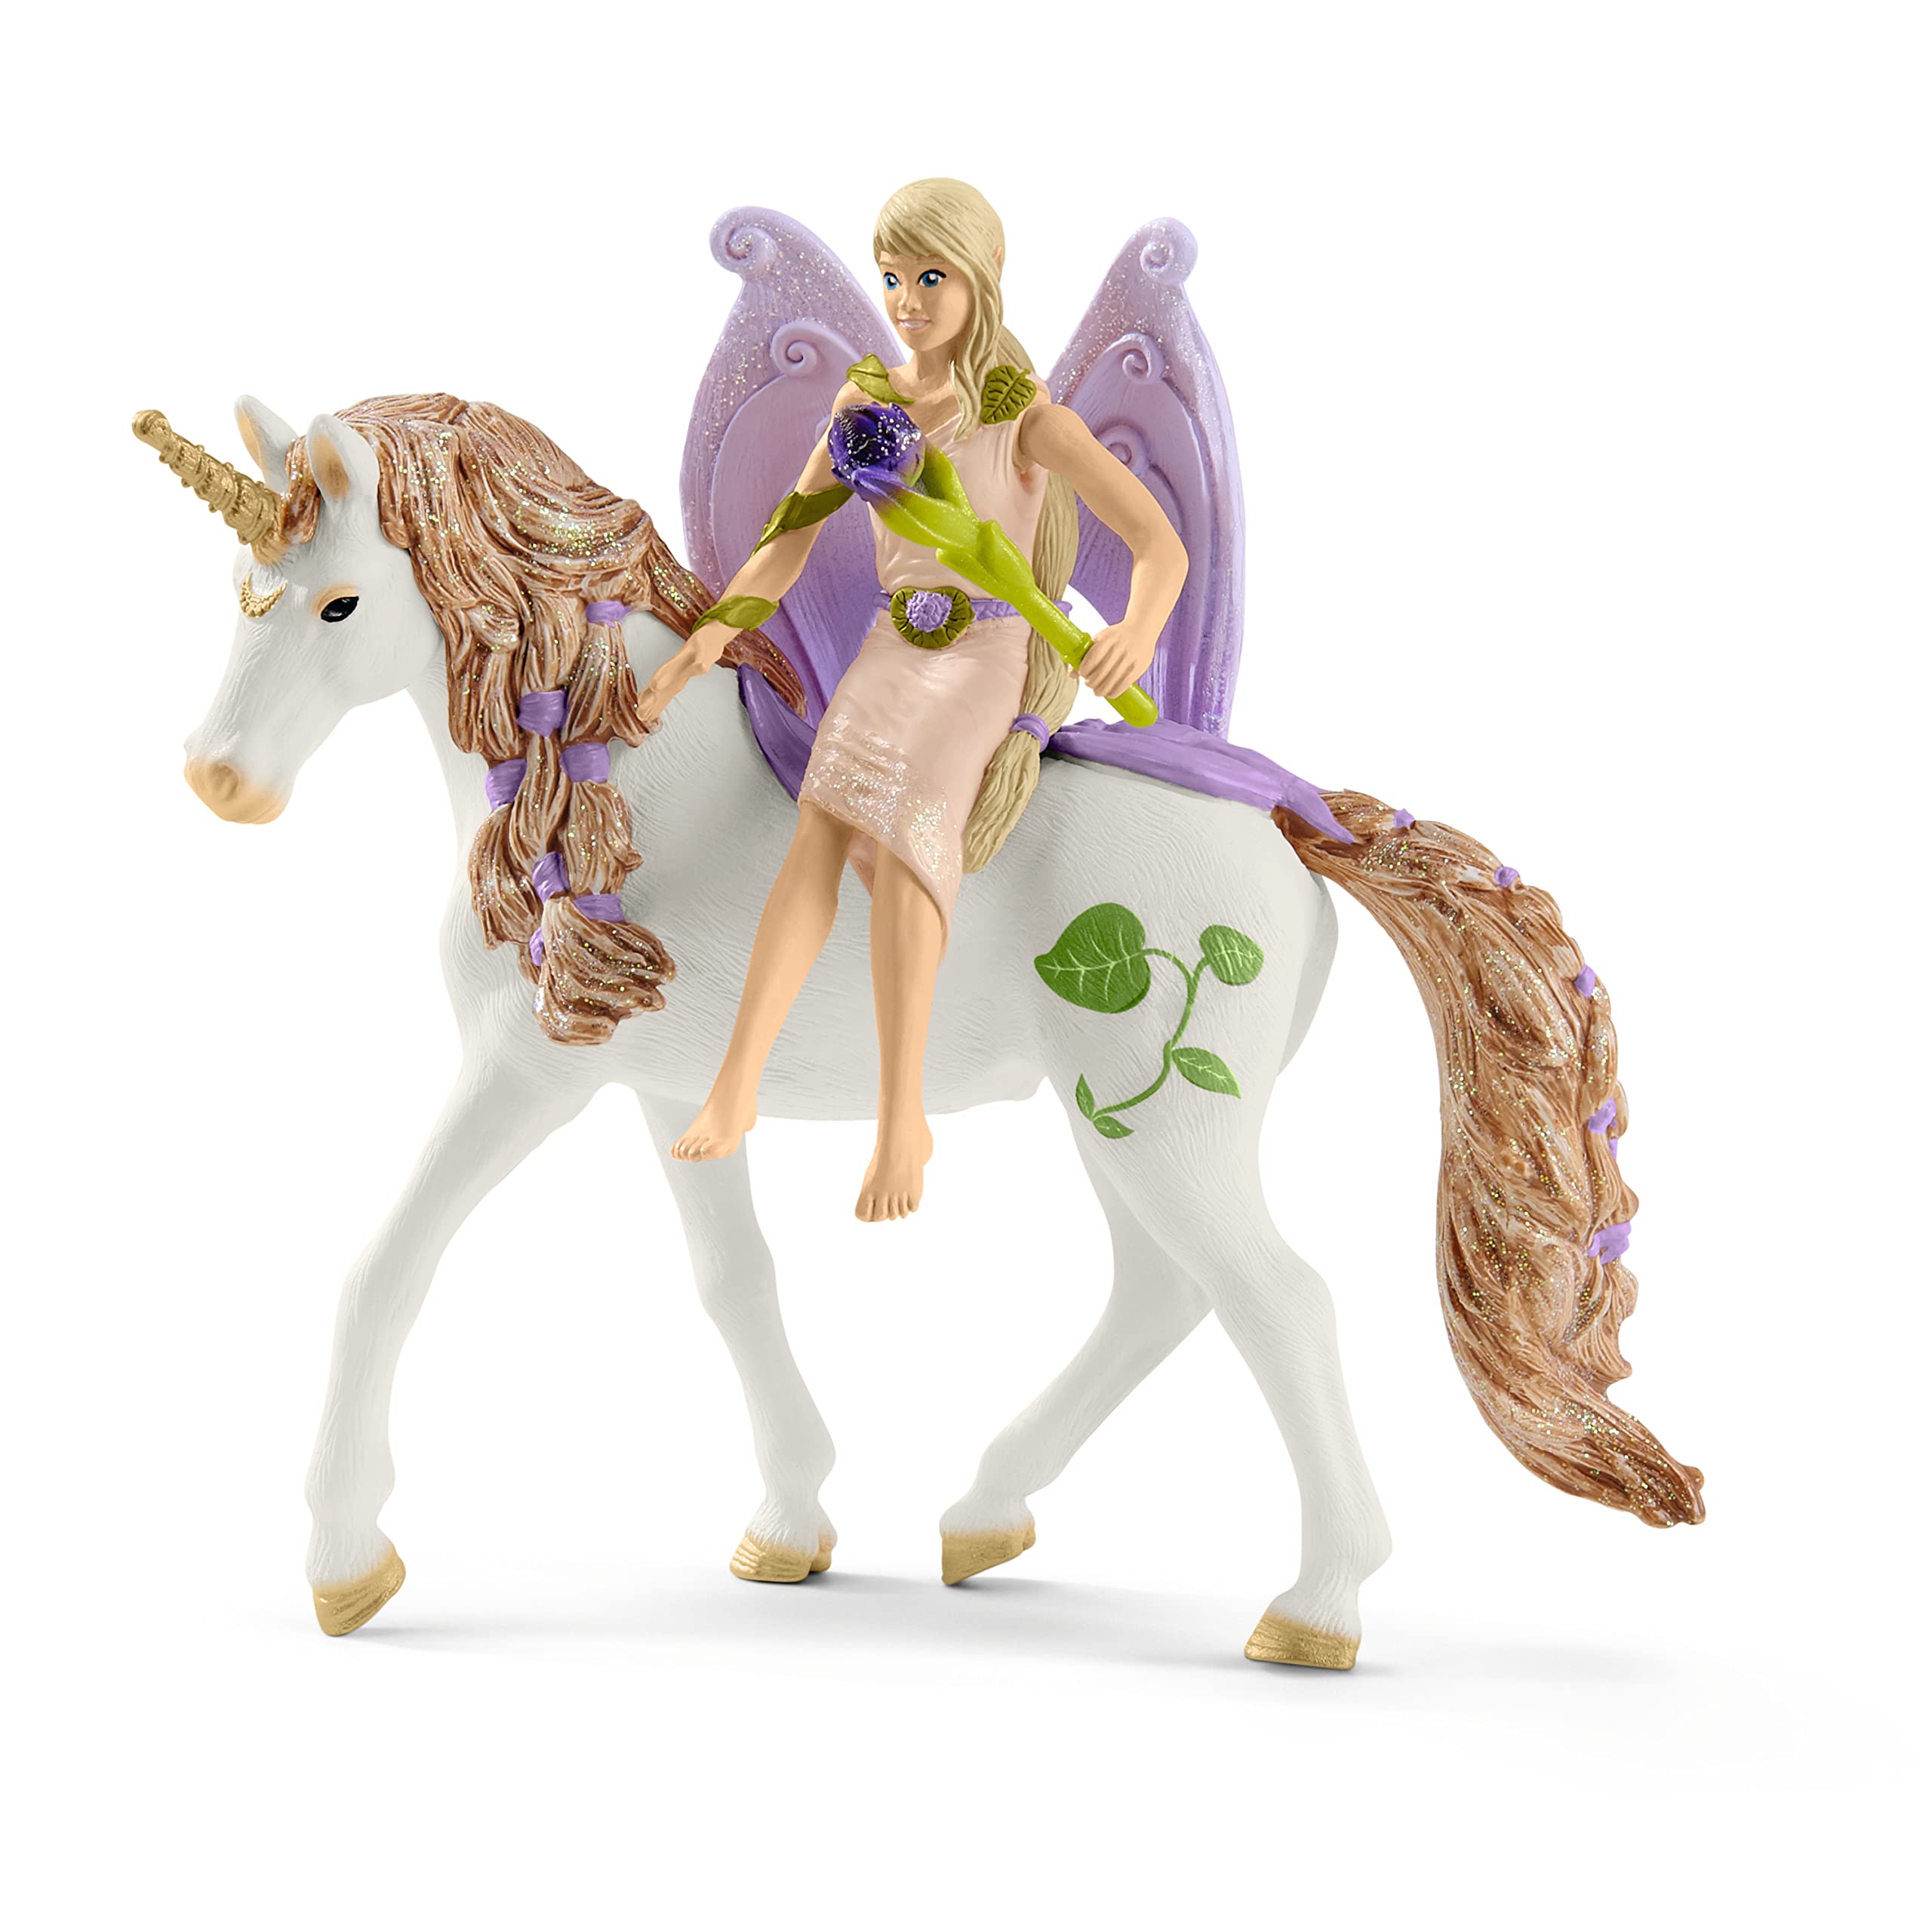 Schleich bayala, Fairy and Unicorn Gifts for Girls and Boys, Glittering Flower Dollhouse with Fairy, Unicorn, and Accessories, Ages 5+